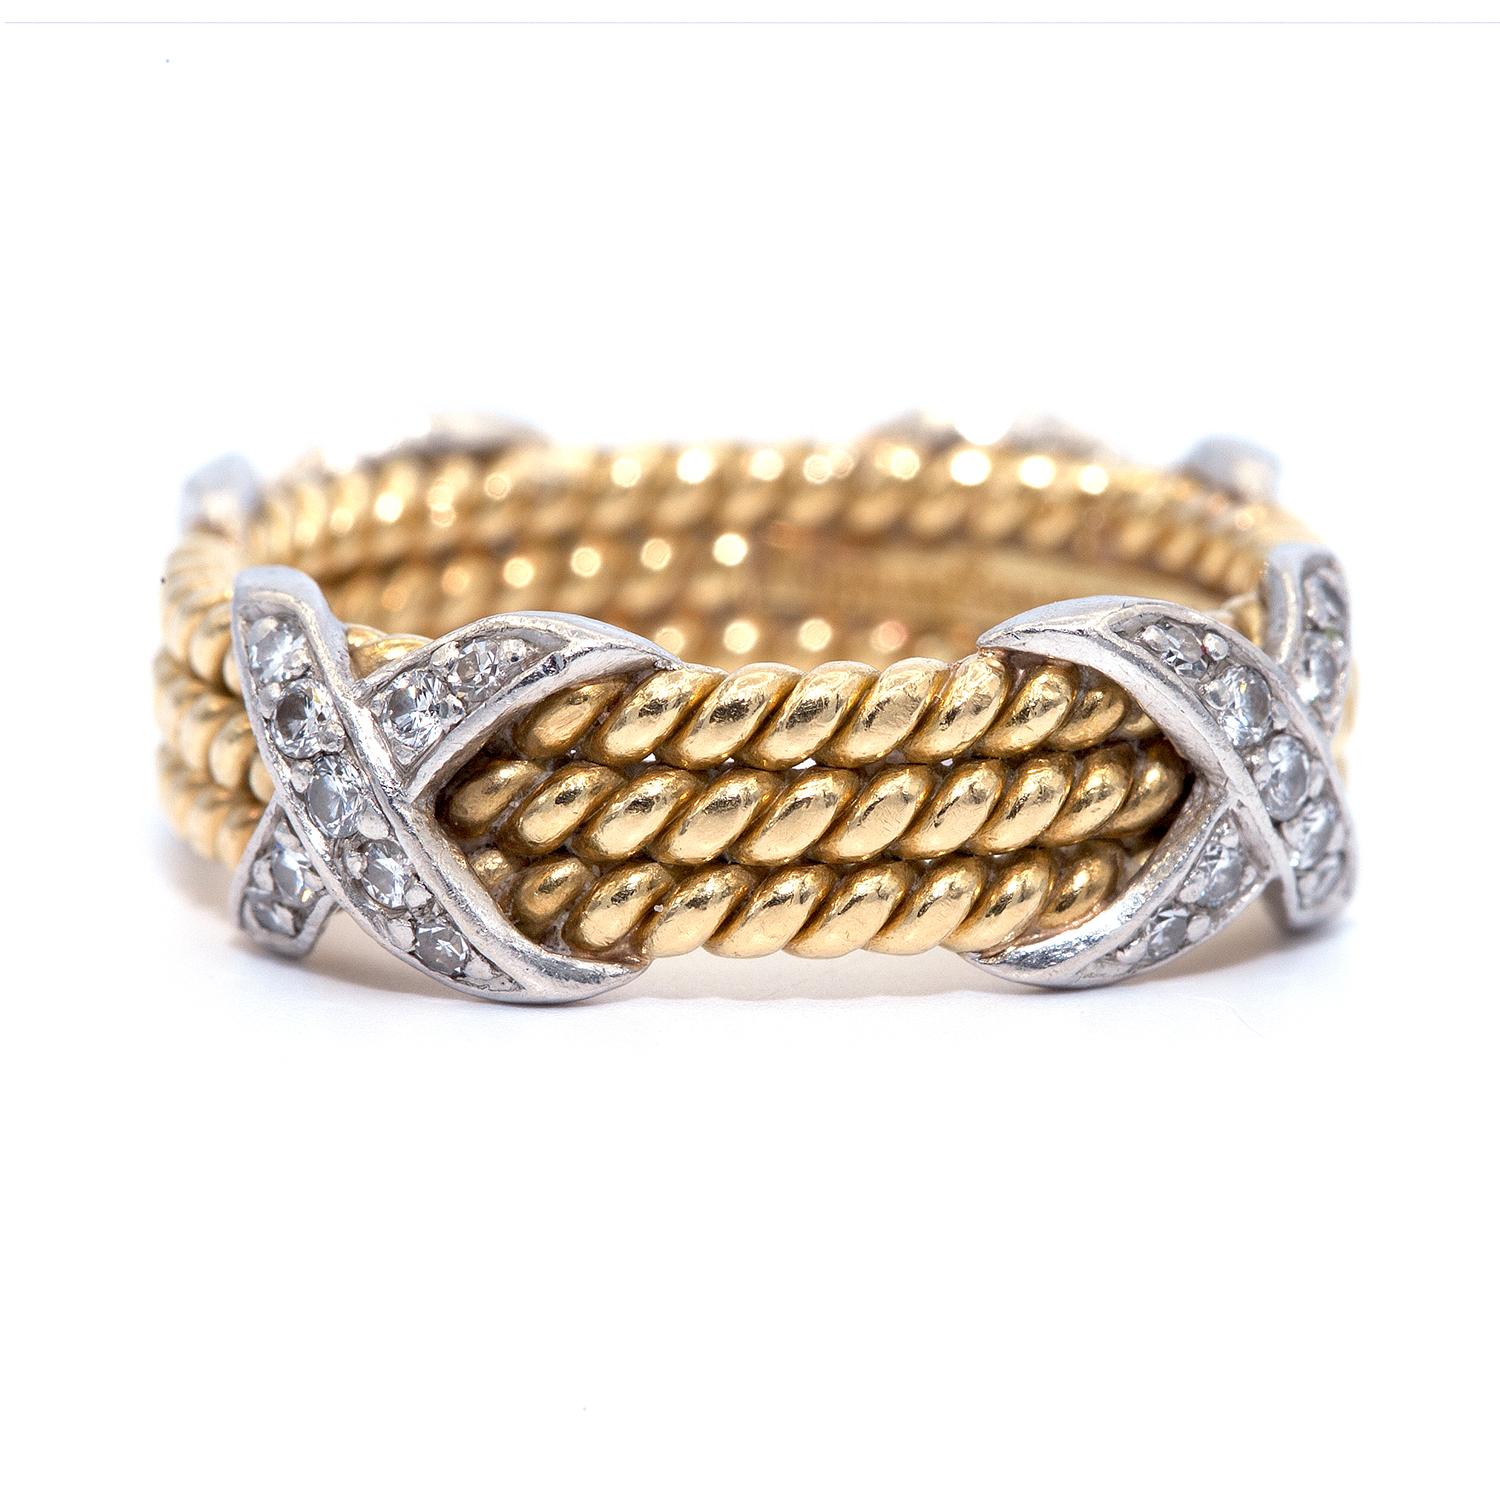 1960's Tiffany & Co. Schlumberger band.
Jean Schlumberger’s visionary creations are among the world’s most intricate designs. Brilliant diamonds illuminate this striking ring.
Designed with three rows of 18 karat yellow gold twisted rope patterned.